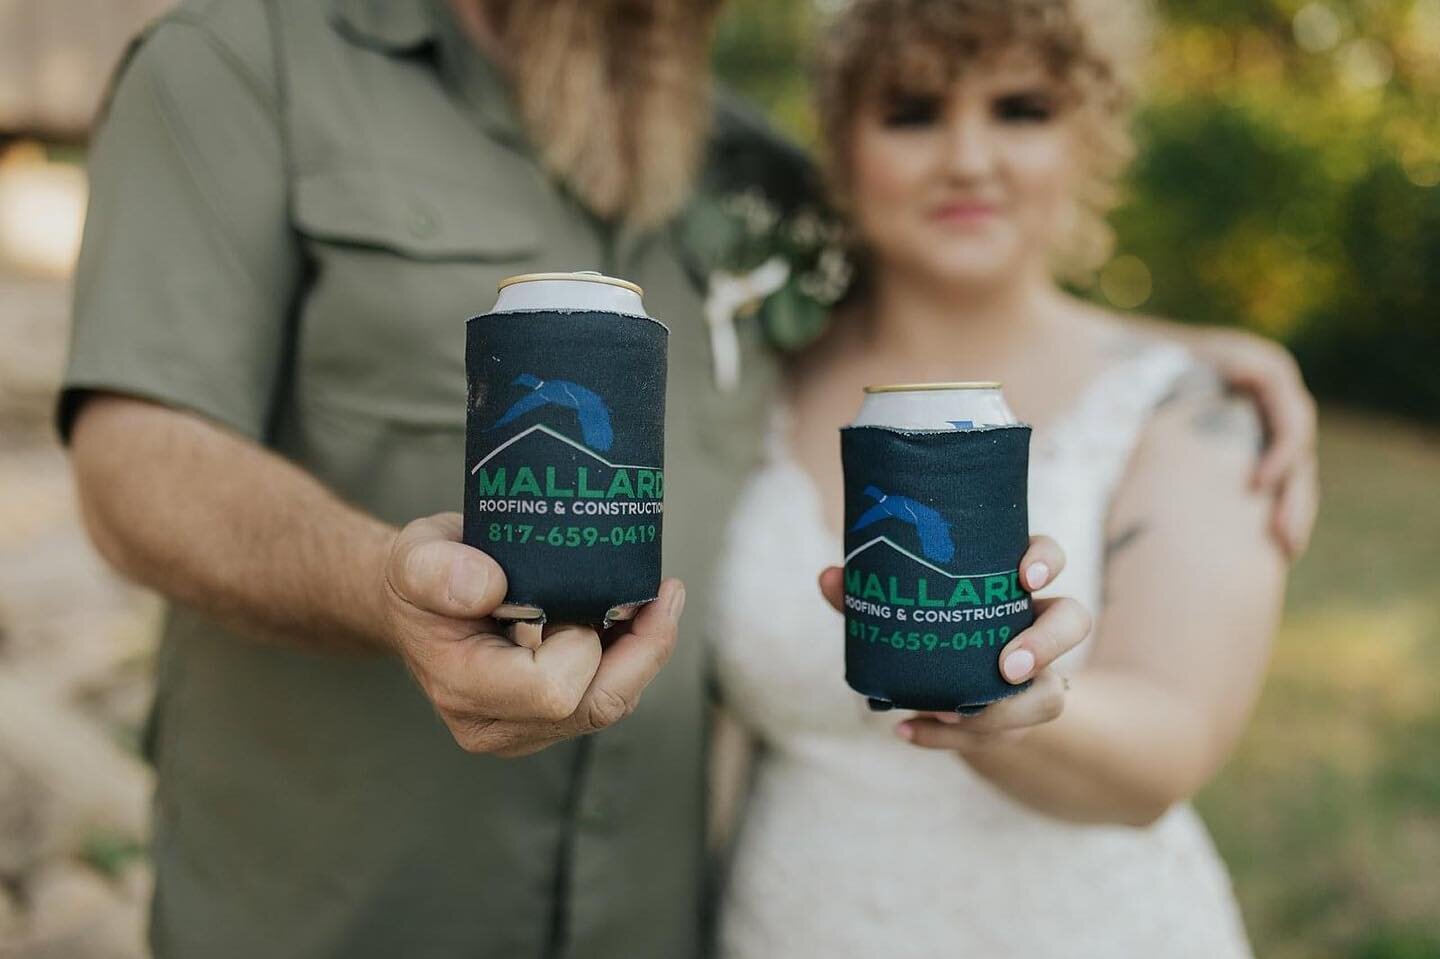 Naturally, Mallard Roofing &amp; Construction had to be included in the wedding.